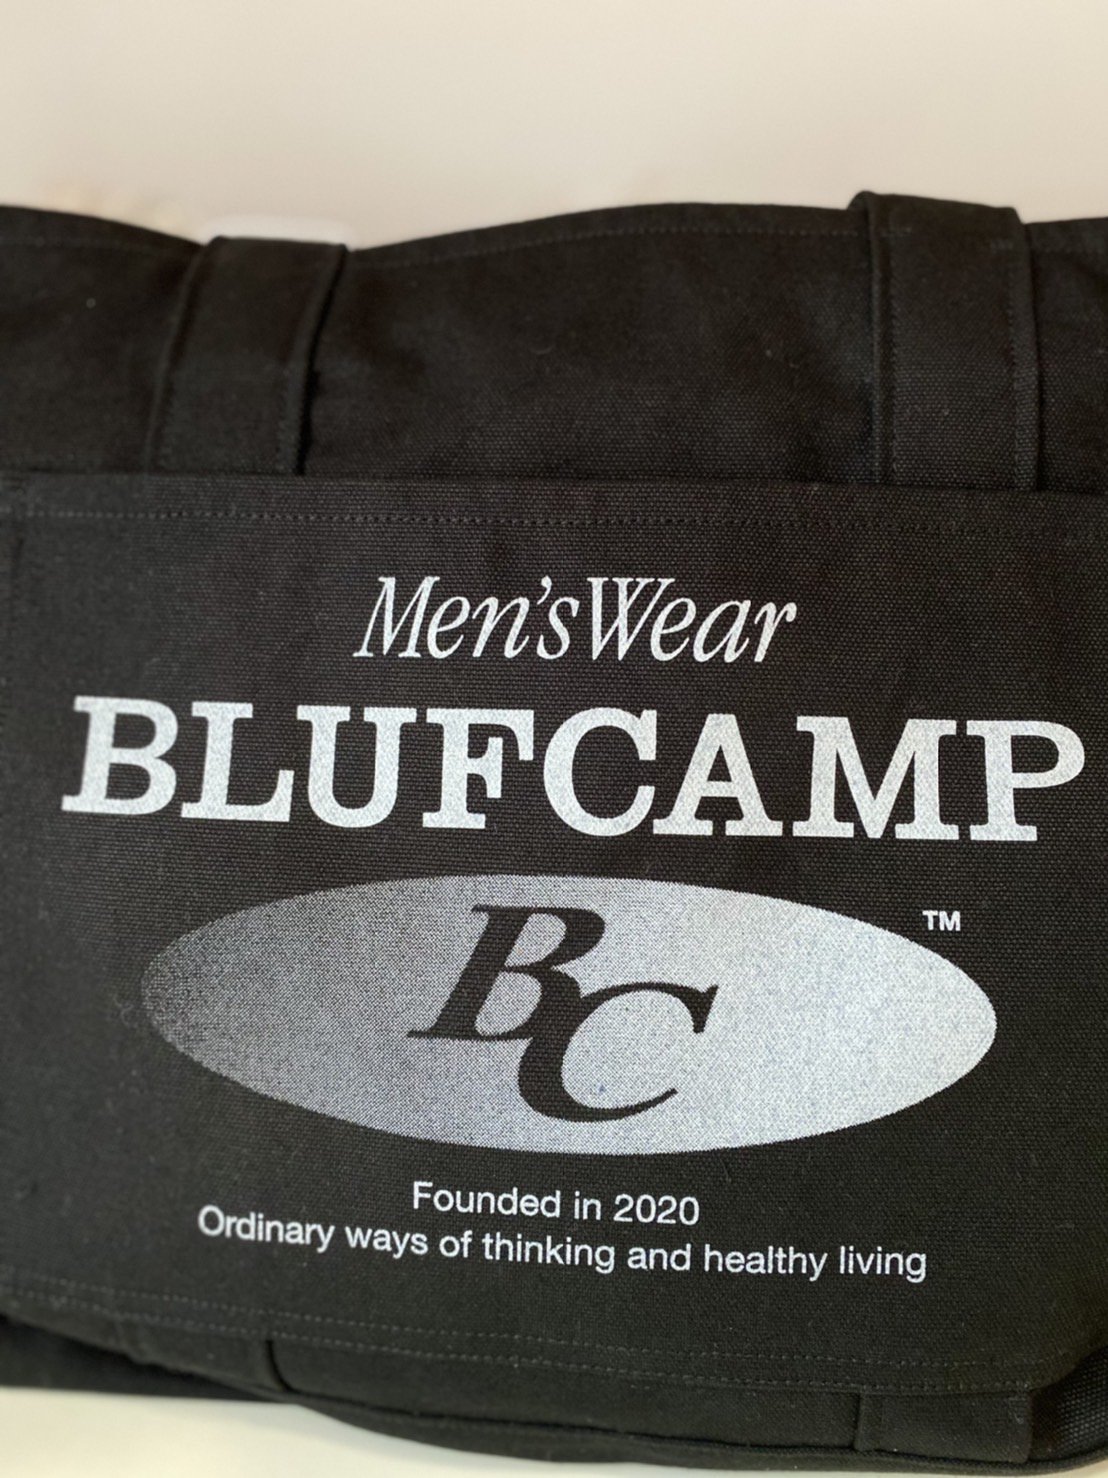 BLUFCAMP<br />Printed Tote Bag-15oz Canvas / Black<img class='new_mark_img2' src='https://img.shop-pro.jp/img/new/icons14.gif' style='border:none;display:inline;margin:0px;padding:0px;width:auto;' />